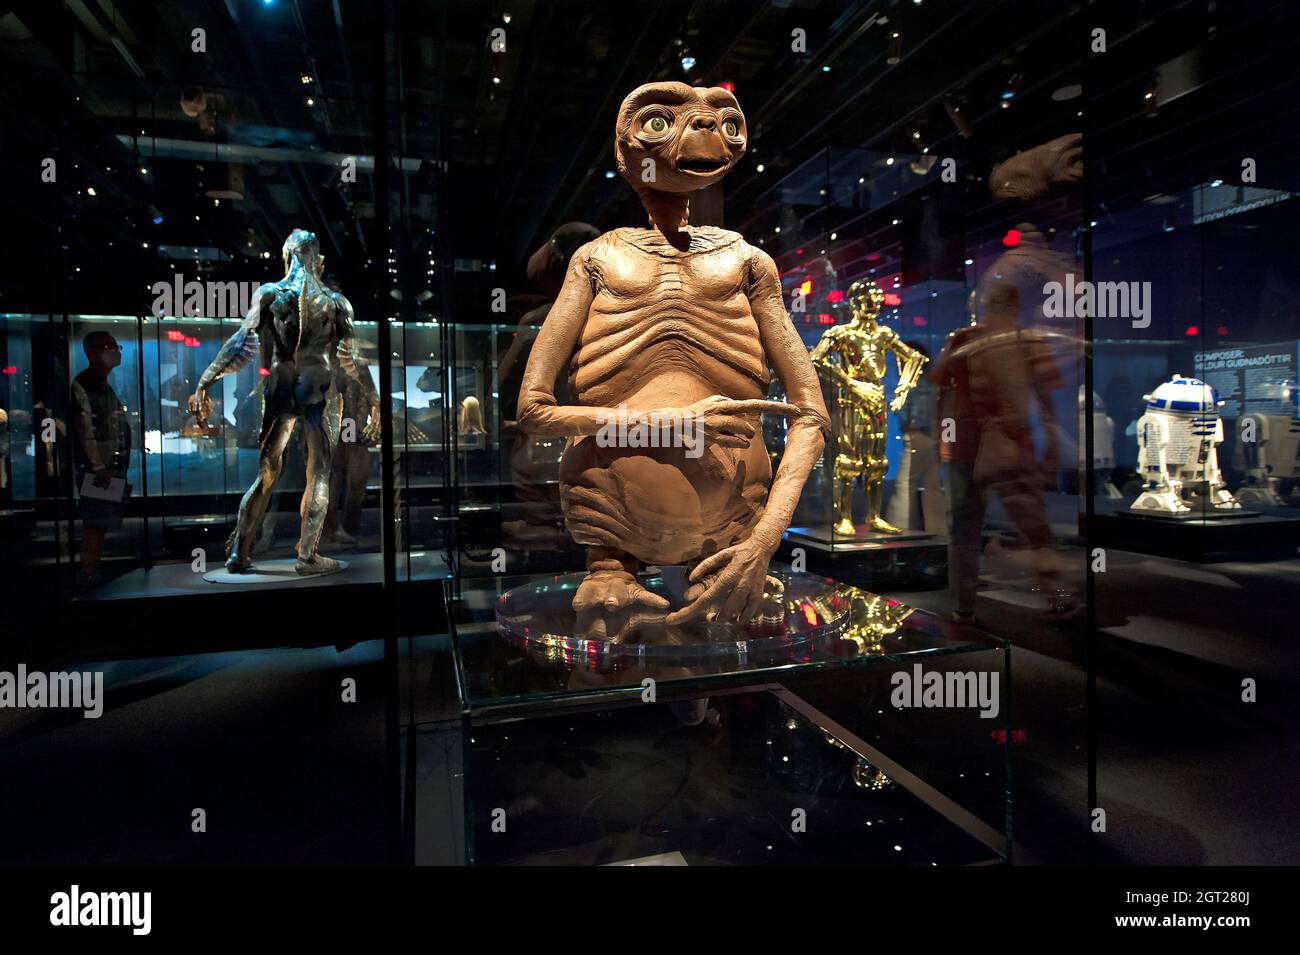 E.T. und andere Science-Fiction-Filme im Academy Museum of Motion Picturs in Los Angeles, Kalifornien Stockfoto